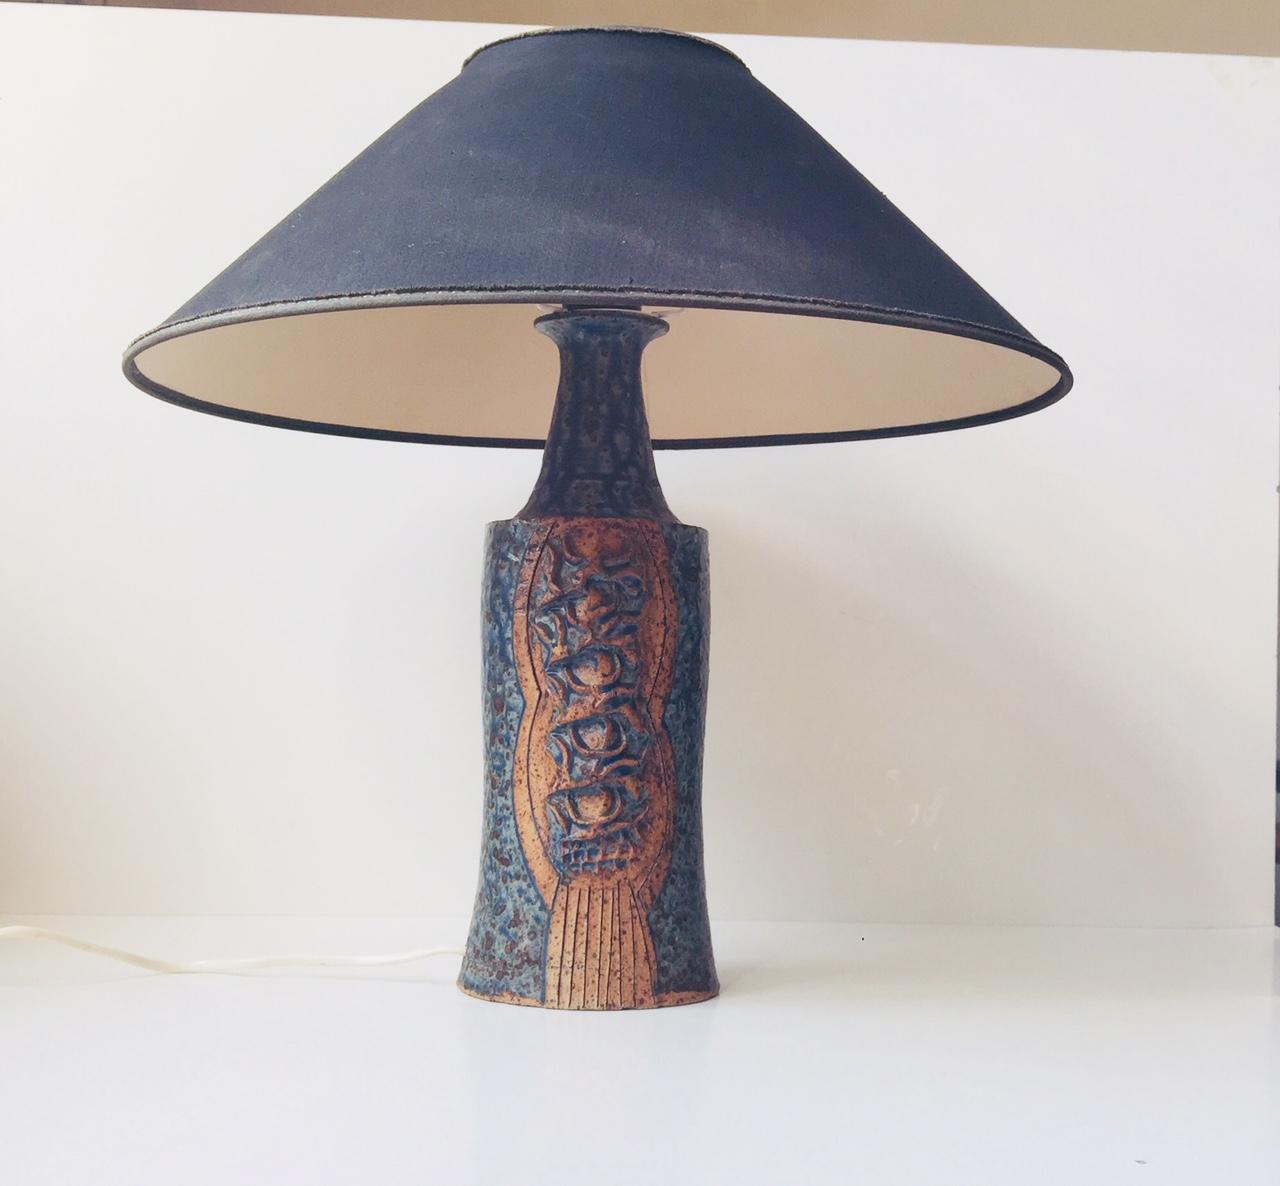 Exceptional table lamp by an anonymous Scandinavian ceramist. It features delicate blue textured glaze reminiscent of Gunnar Nylund and architectural features to the exposed and textured center. It is signed to the inside of the base. The black